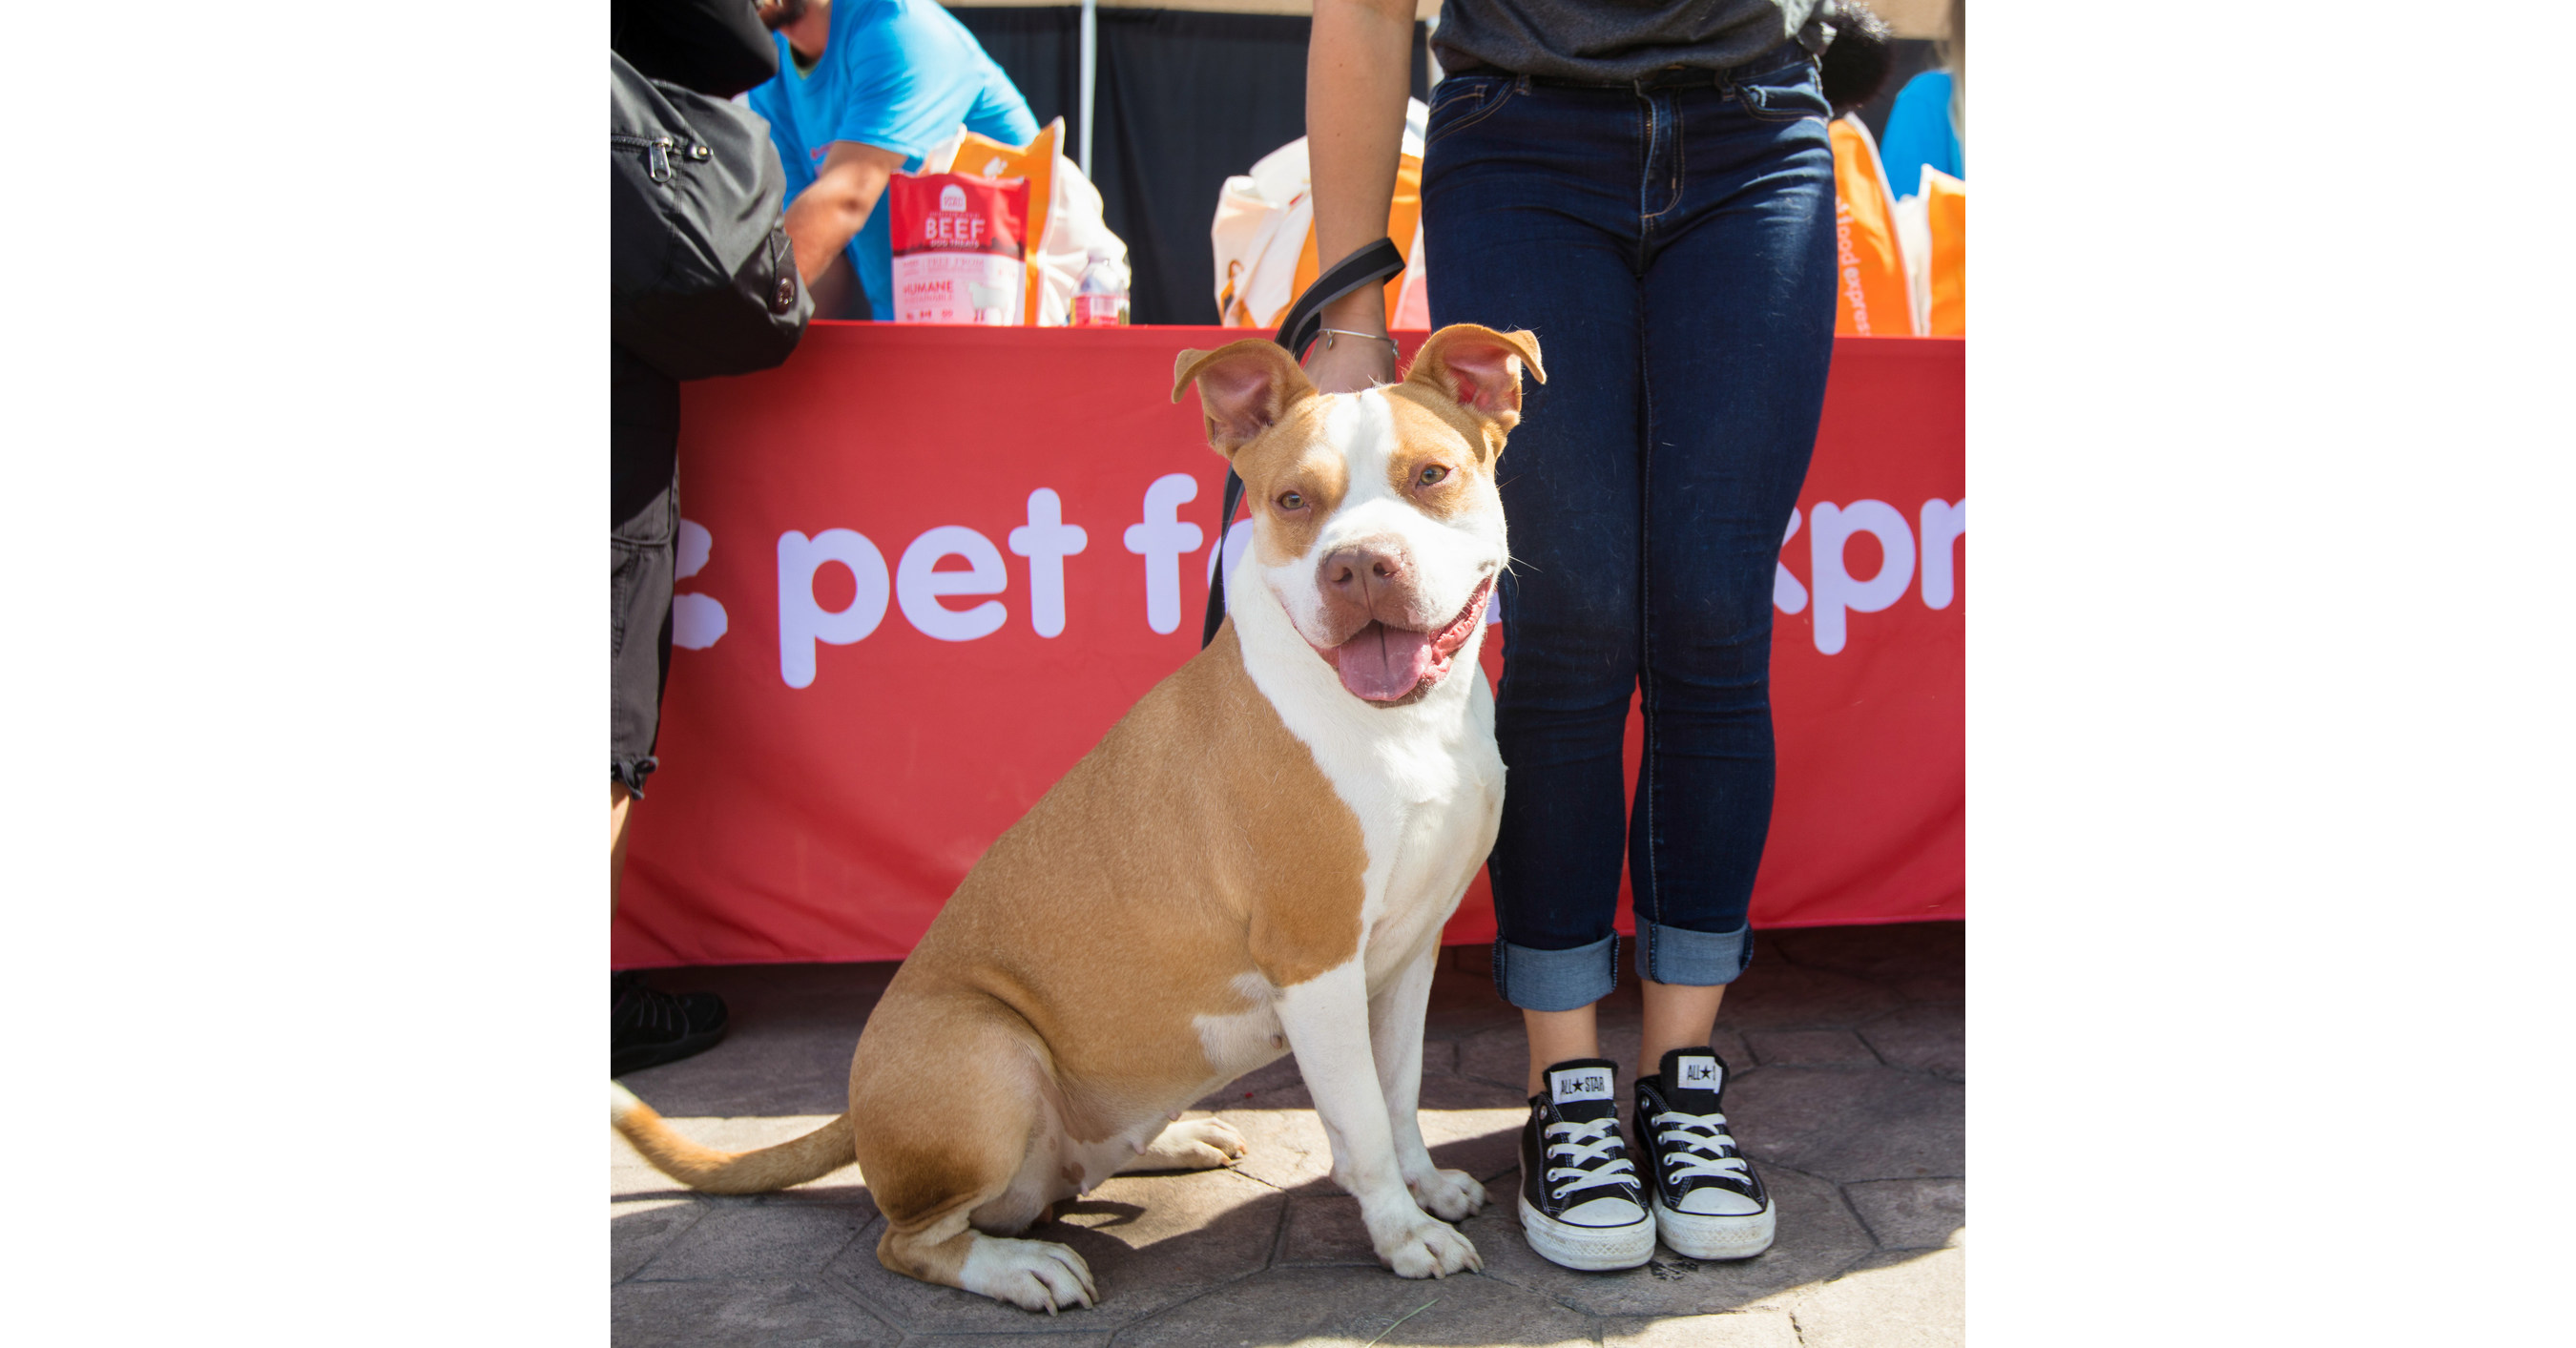 PET FOOD EXPRESS HOSTS MONTH-LONG VIRTUAL PET FAIR PLUS SPECIAL PET ADOPTION EXTRAVAGANZA EVENTS IN ALL STORES SEPTEMBER 24 & 25